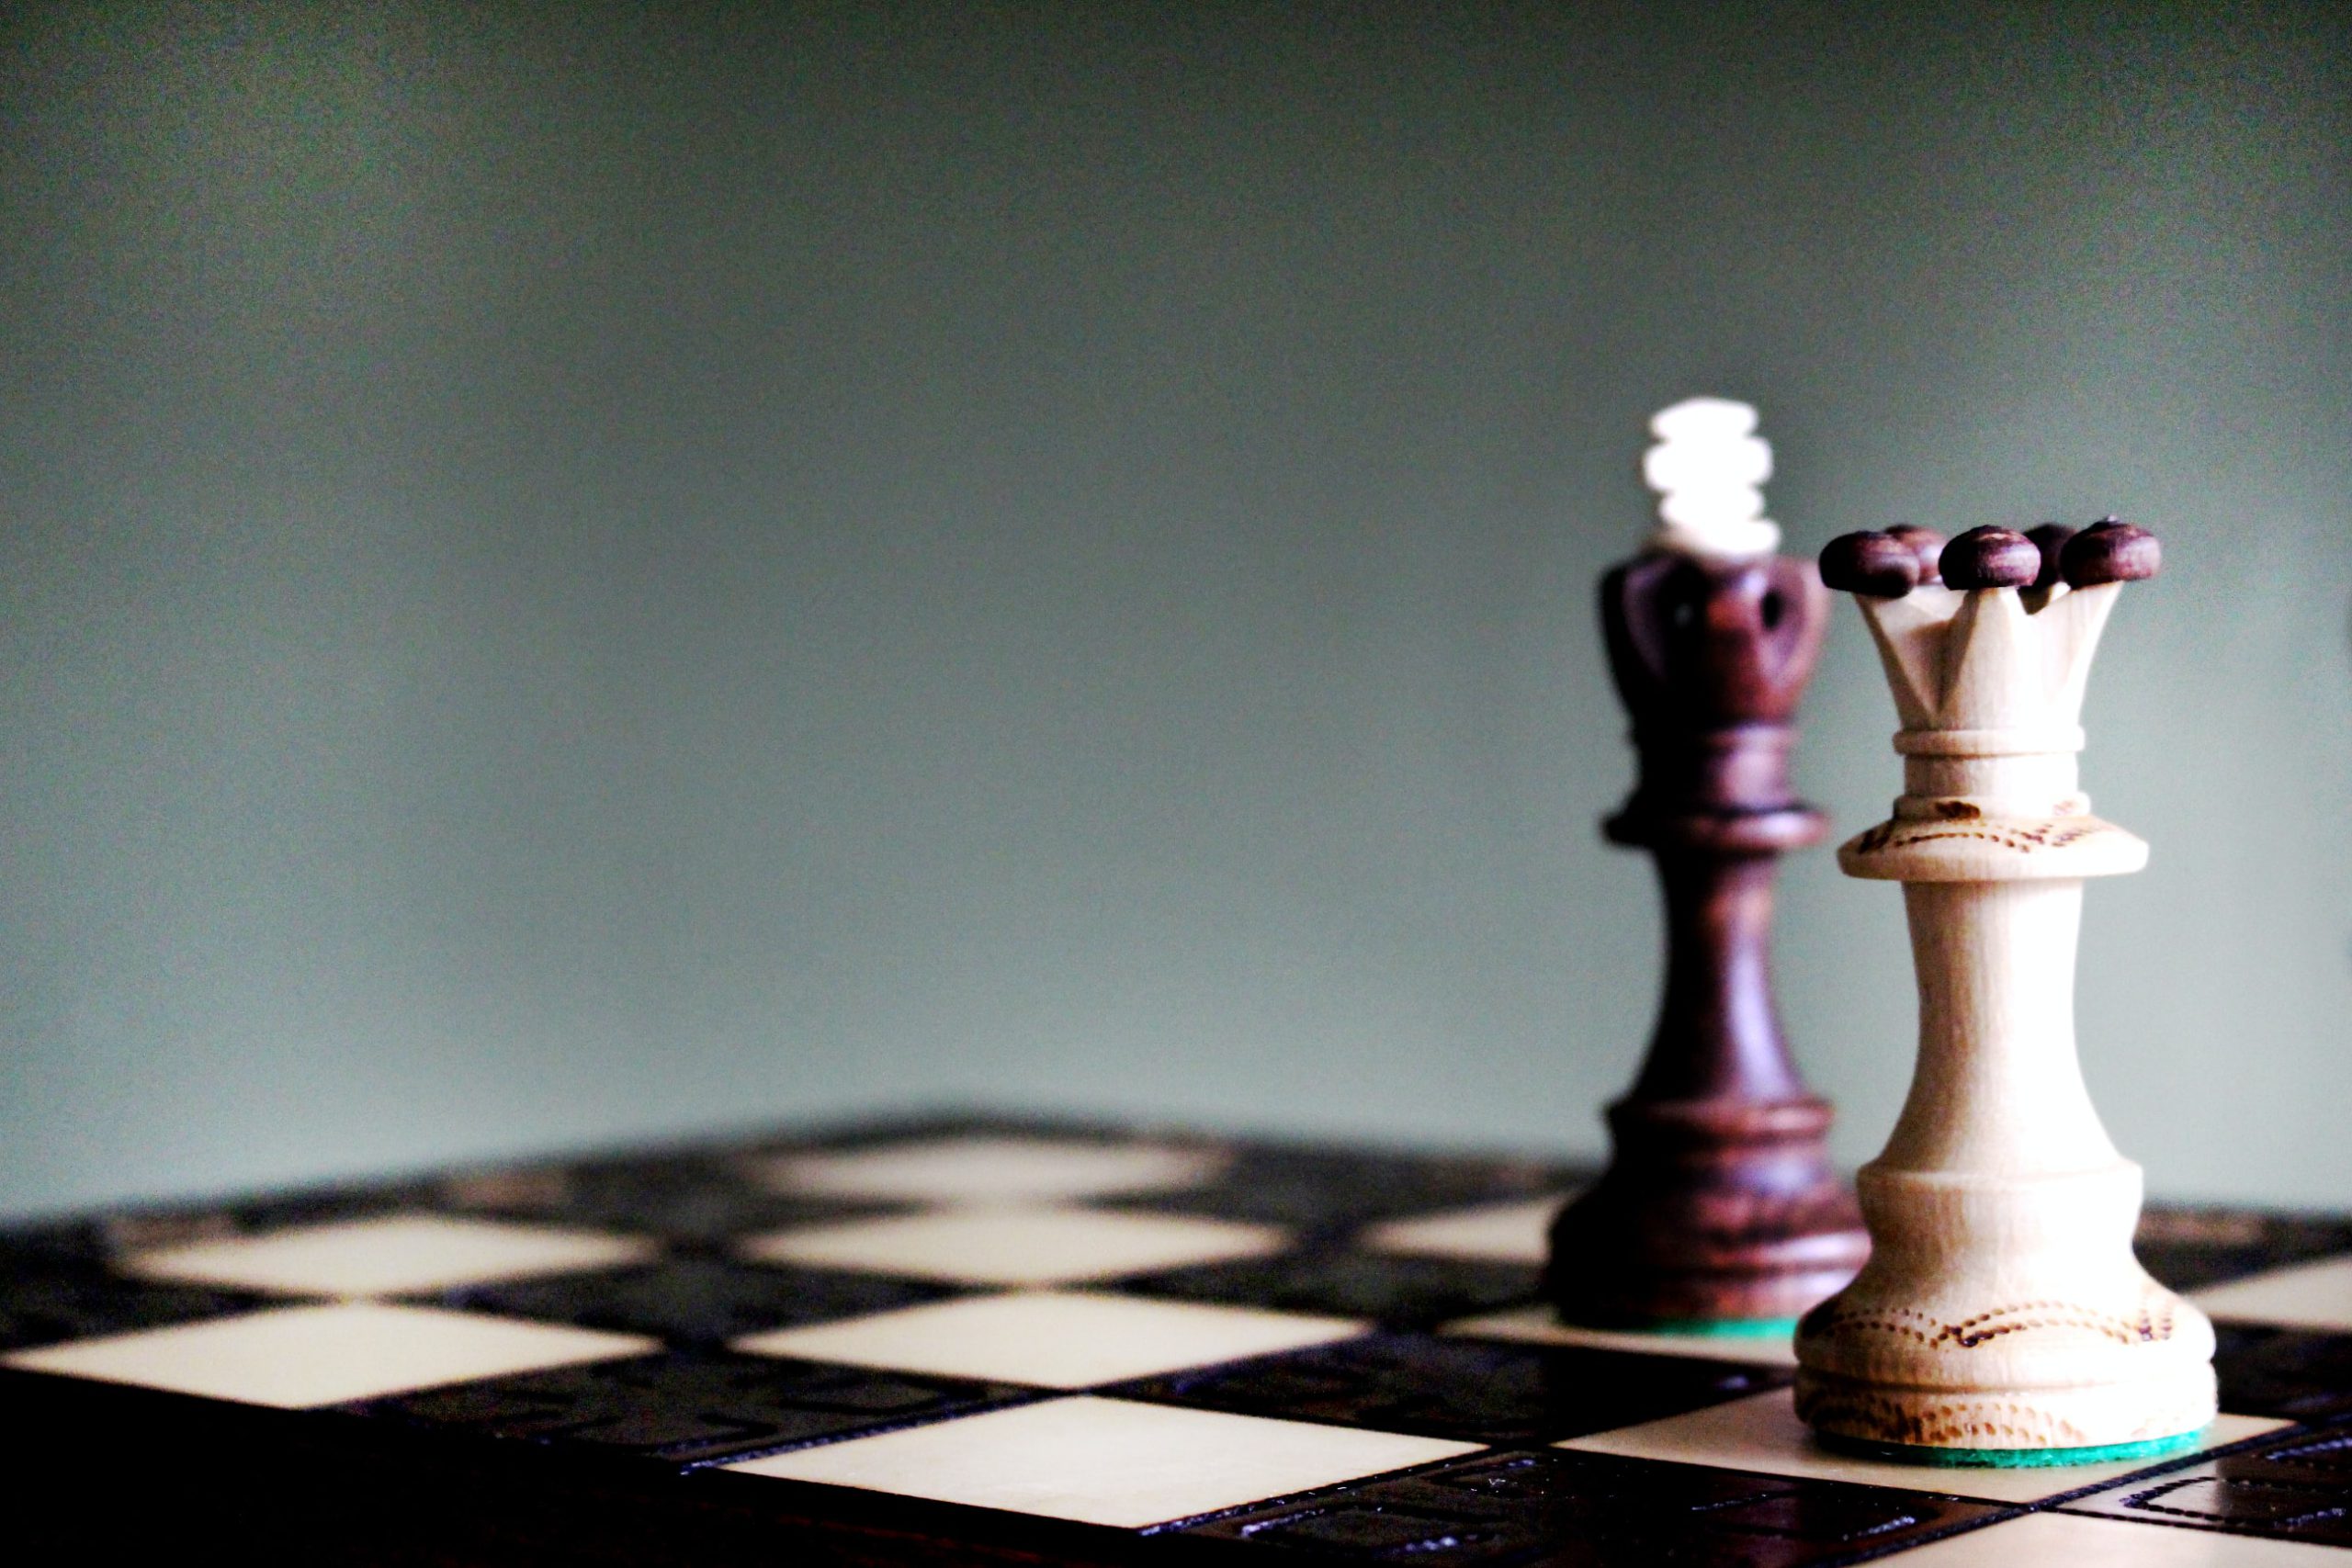 Top Chess Apps for Beginners - Chessable Blog